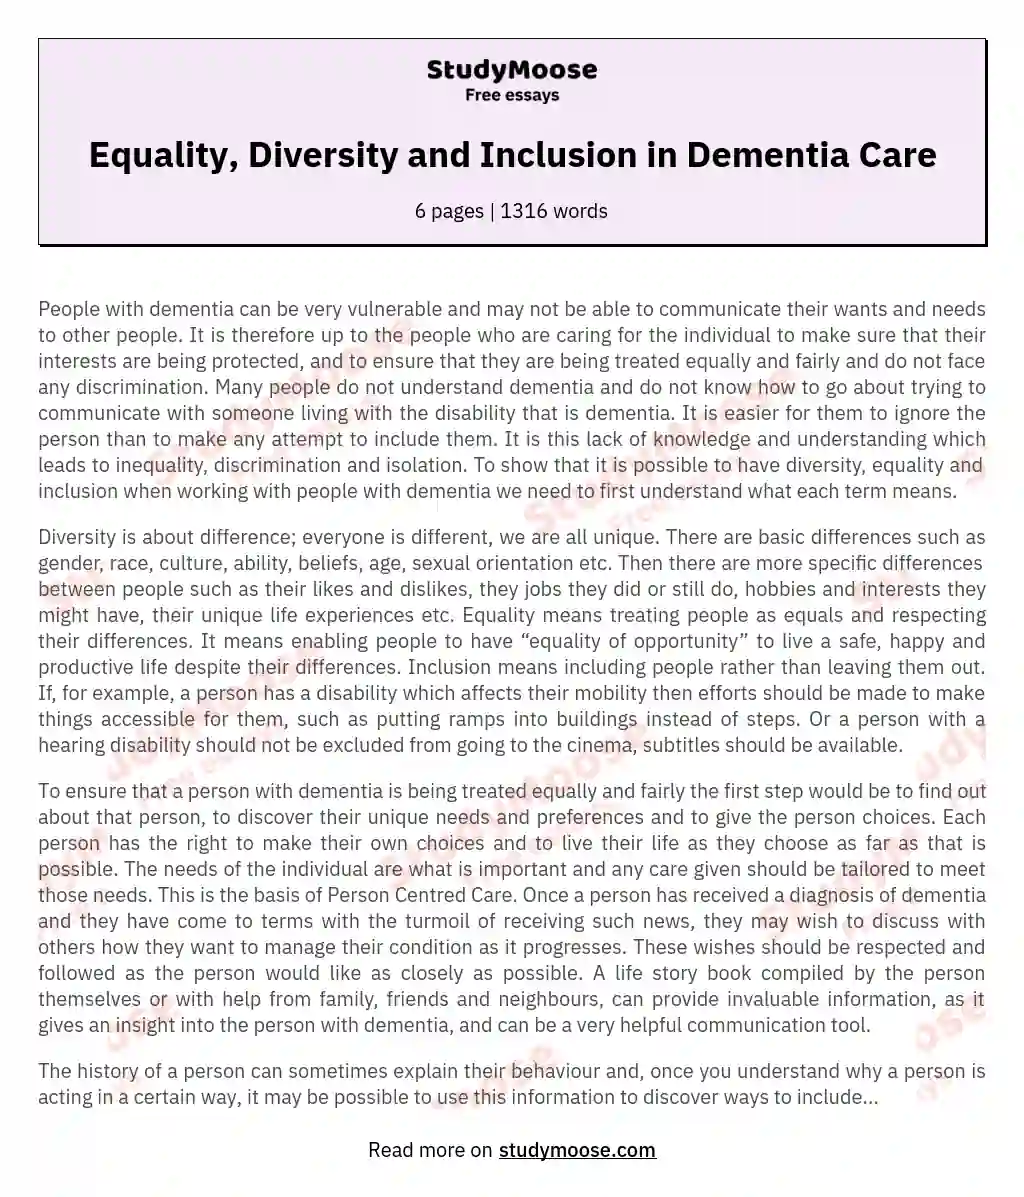 Equality, Diversity and Inclusion in Dementia Care